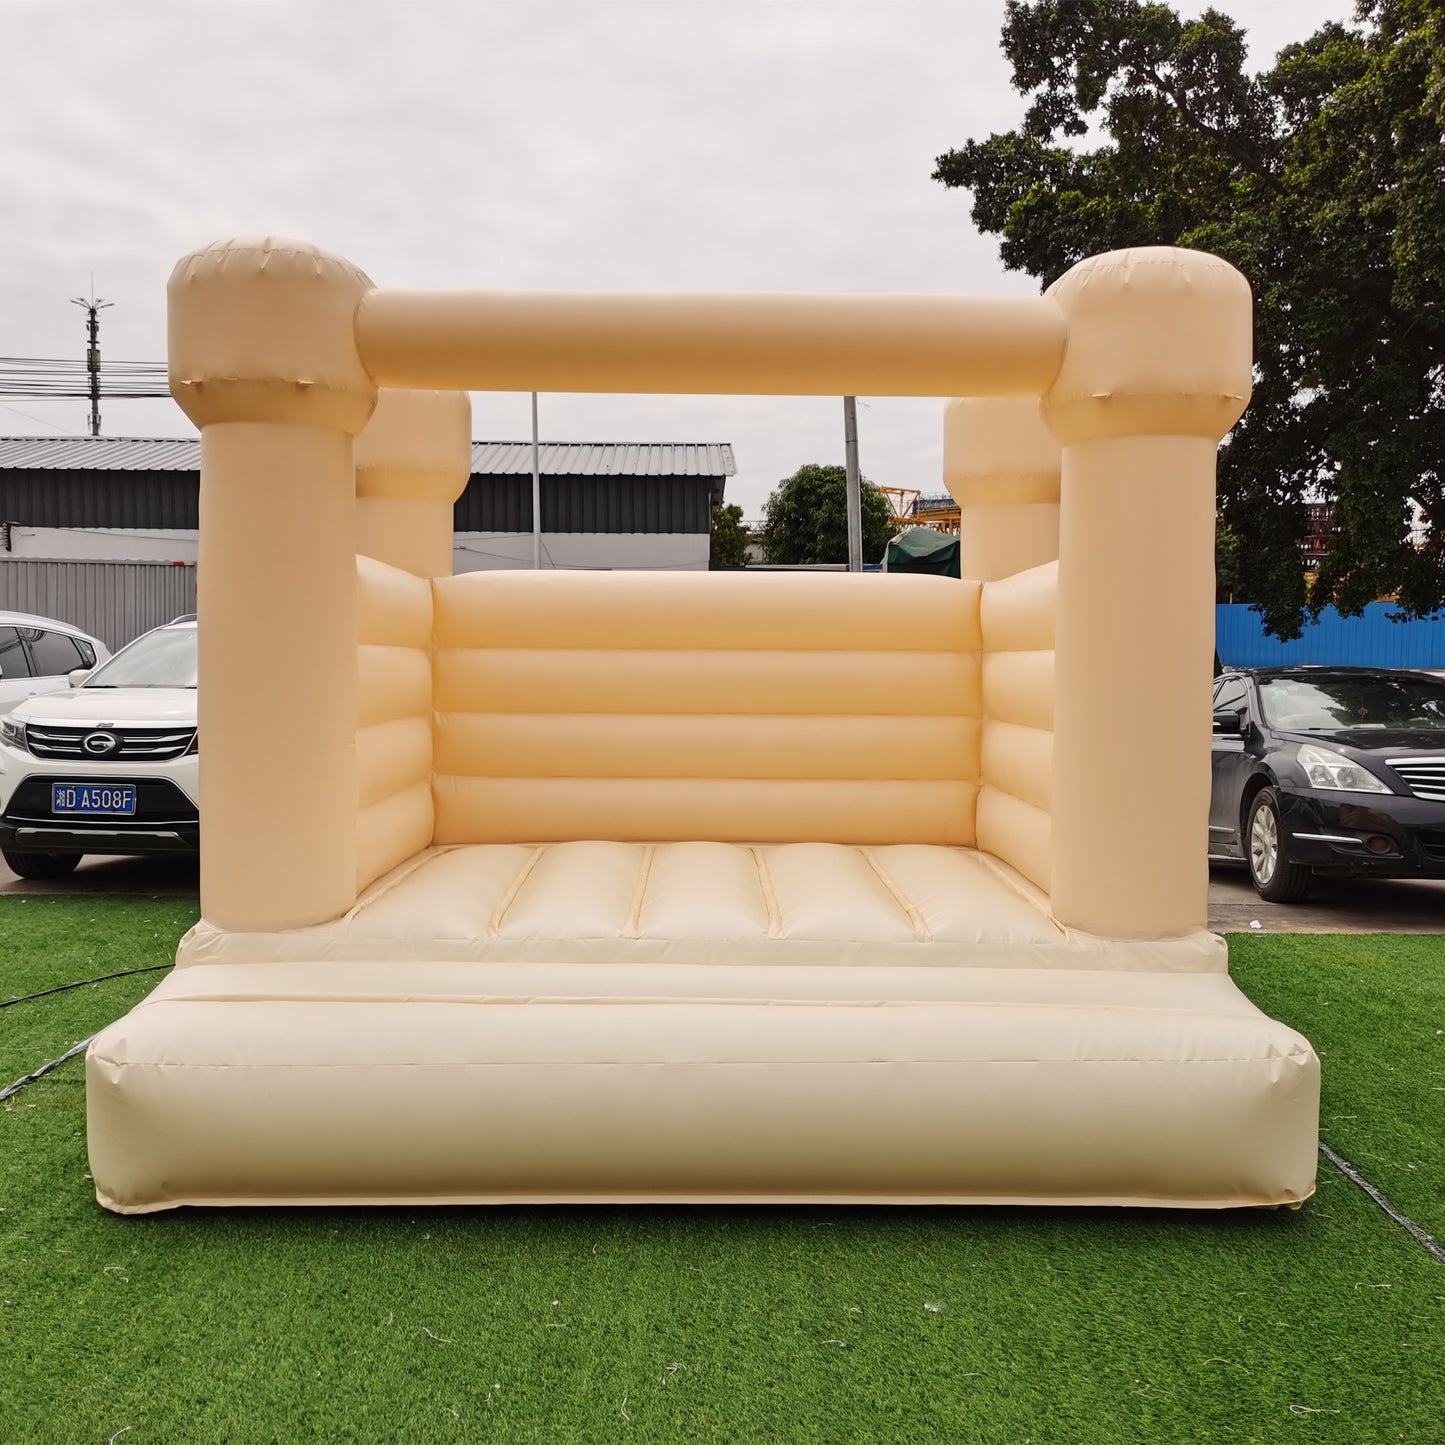 10x10ft peach color white bounce house for sale